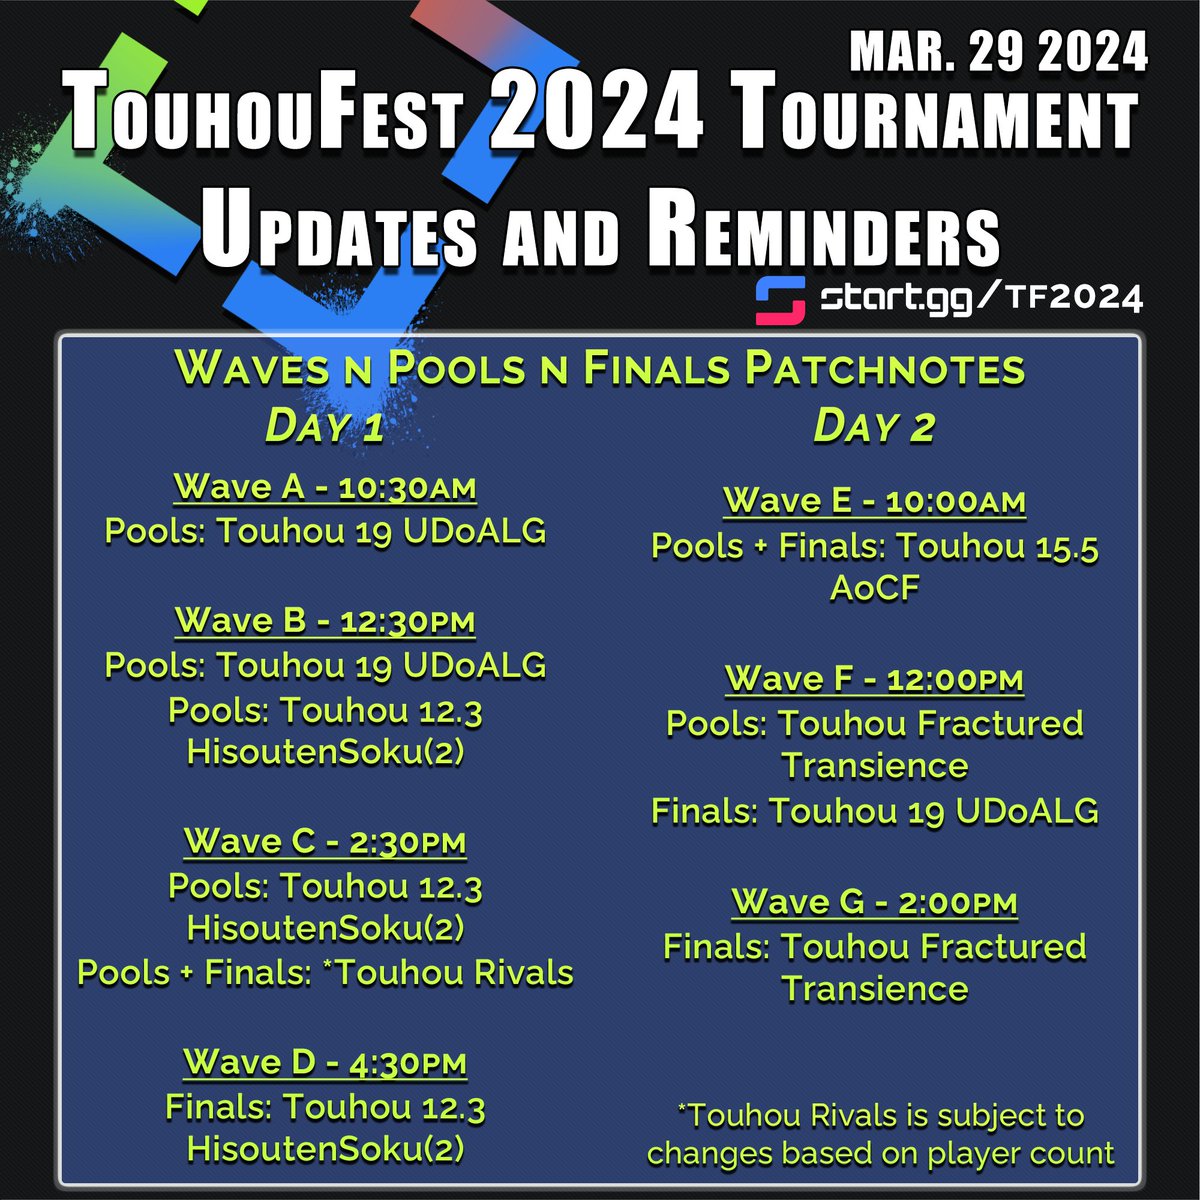 Weekly @TouhouFest '24 'UaR' - Issue March. 29 2024 Hi all, we have a mostly* solidified update on what the schedule for Pools + Finals are in each Wave. *The Touhou Rivals bracket will be all on Wave C unless there is an increase in player count. start.gg/tf2024